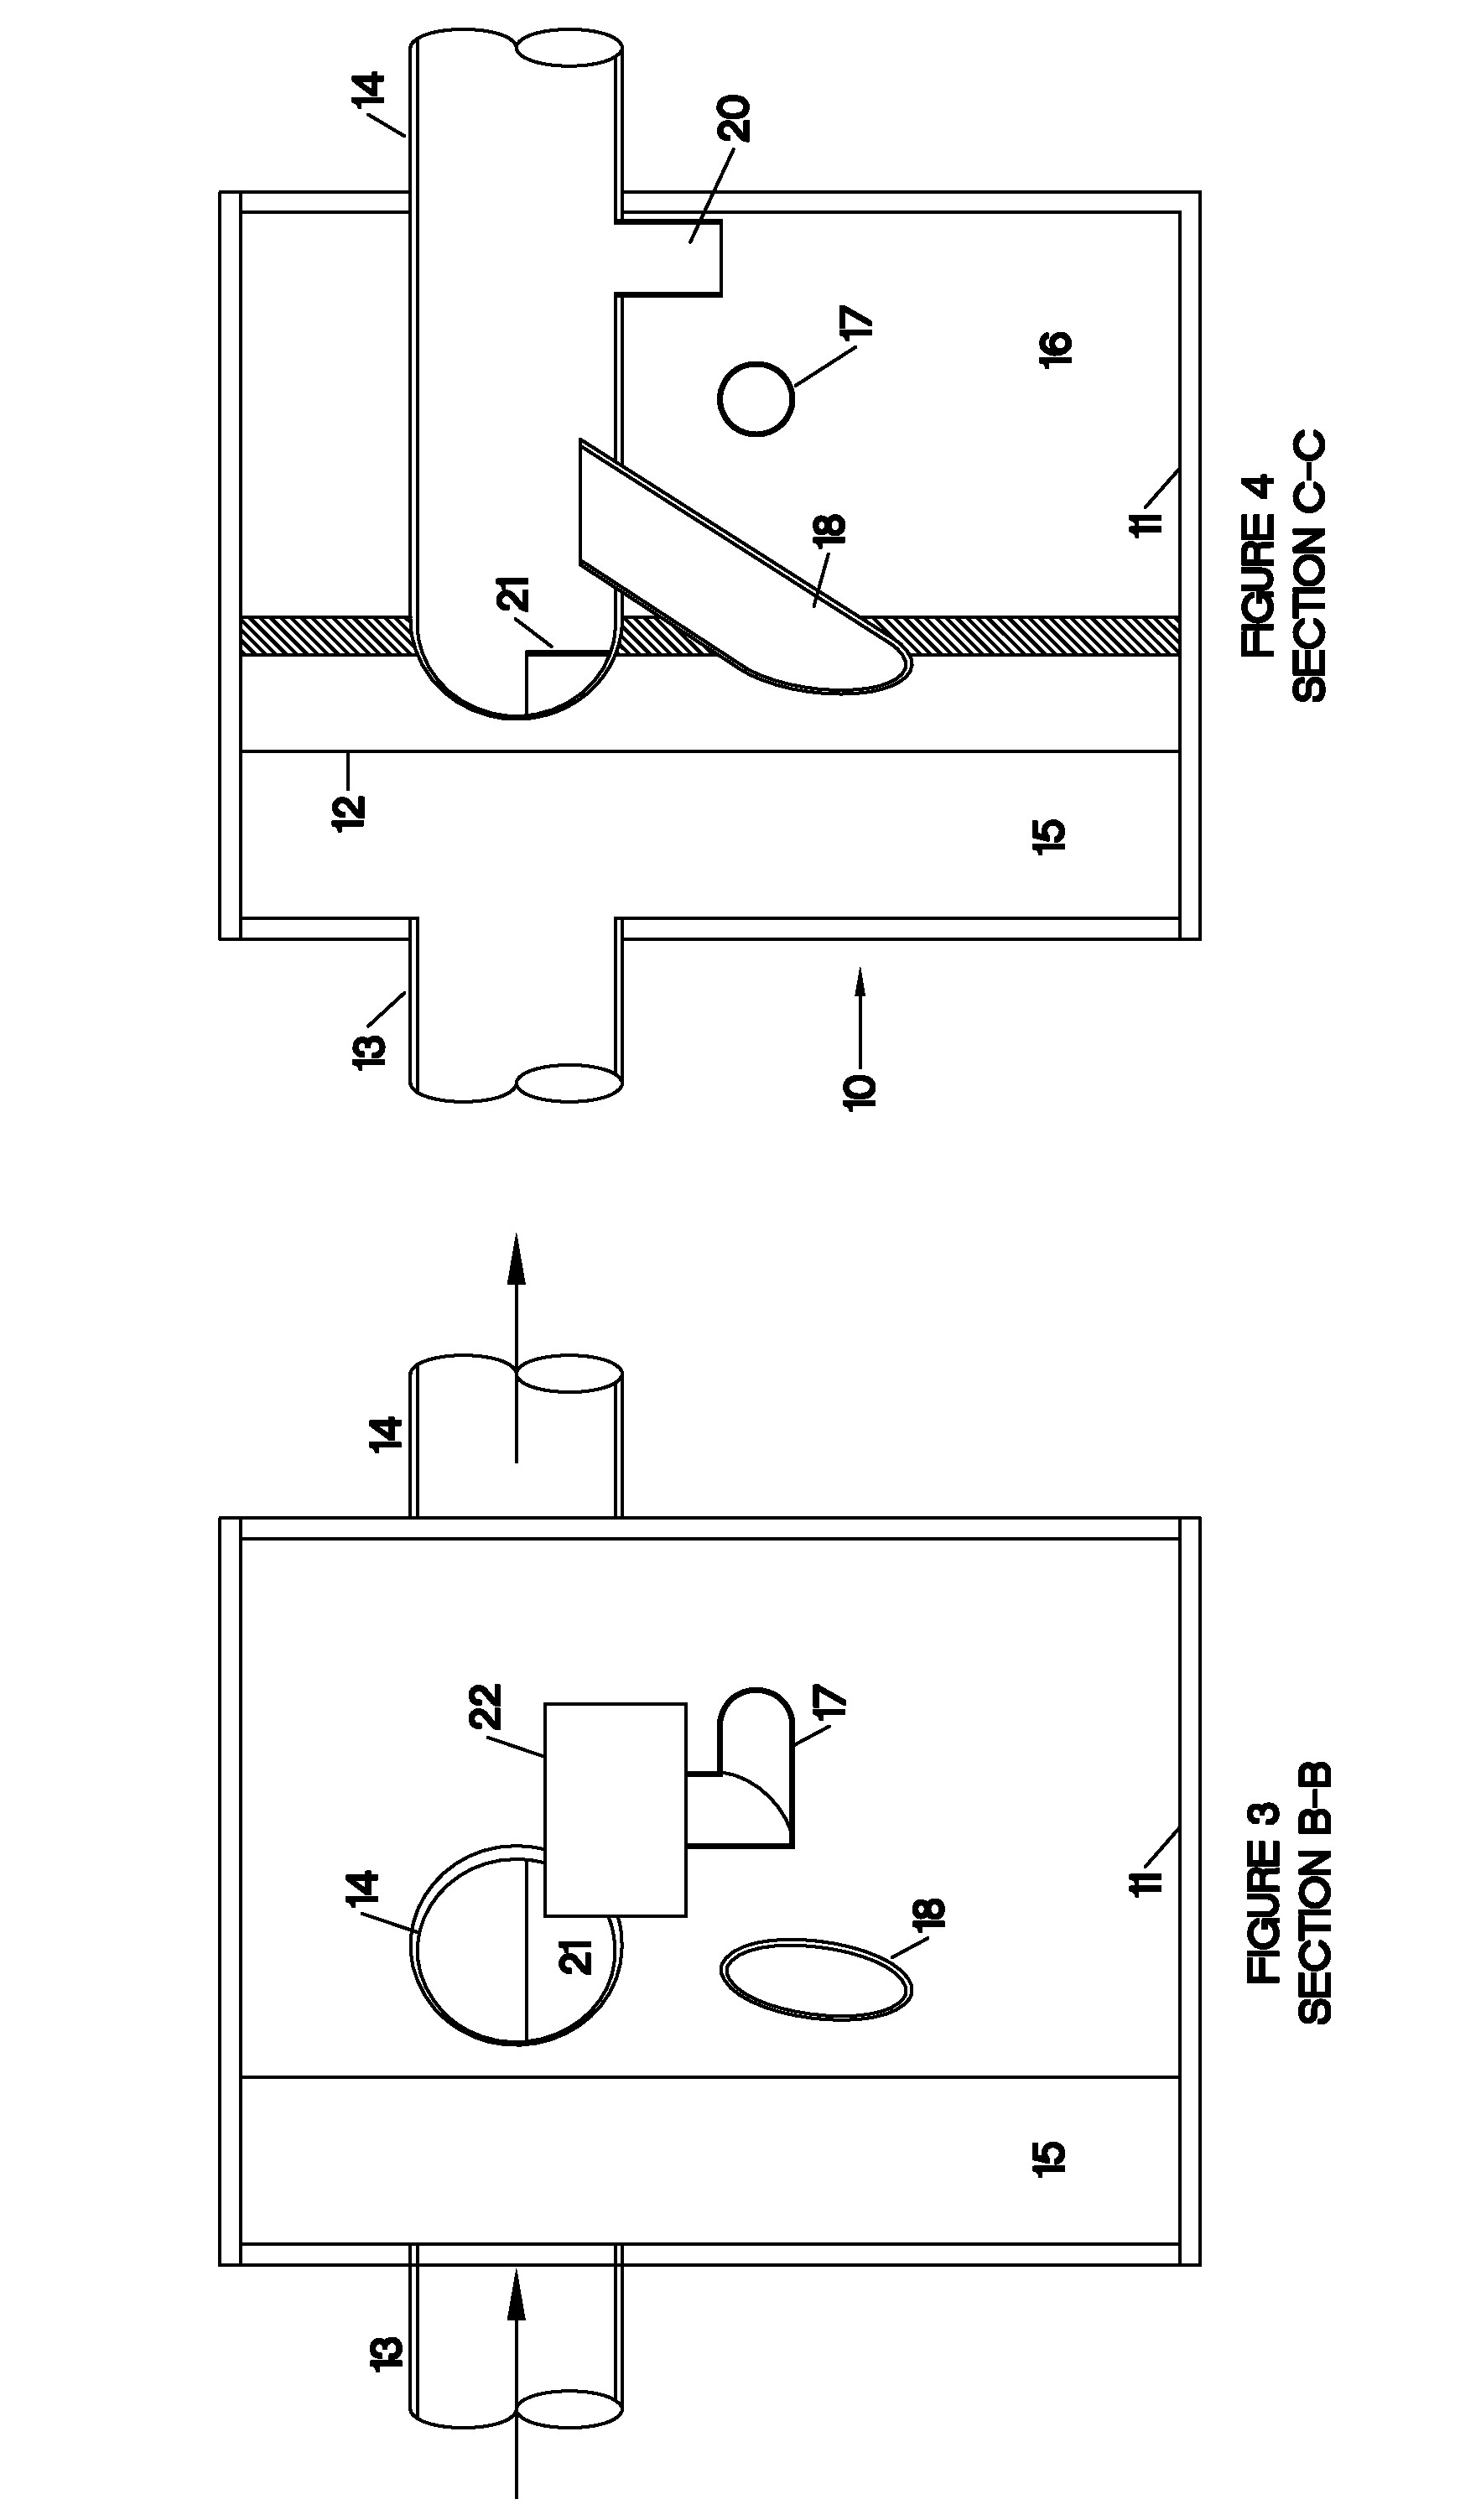 Apparatus to Separate Light Fluids, Heavy Fluids, and/or Sediment from a Fluid Stream